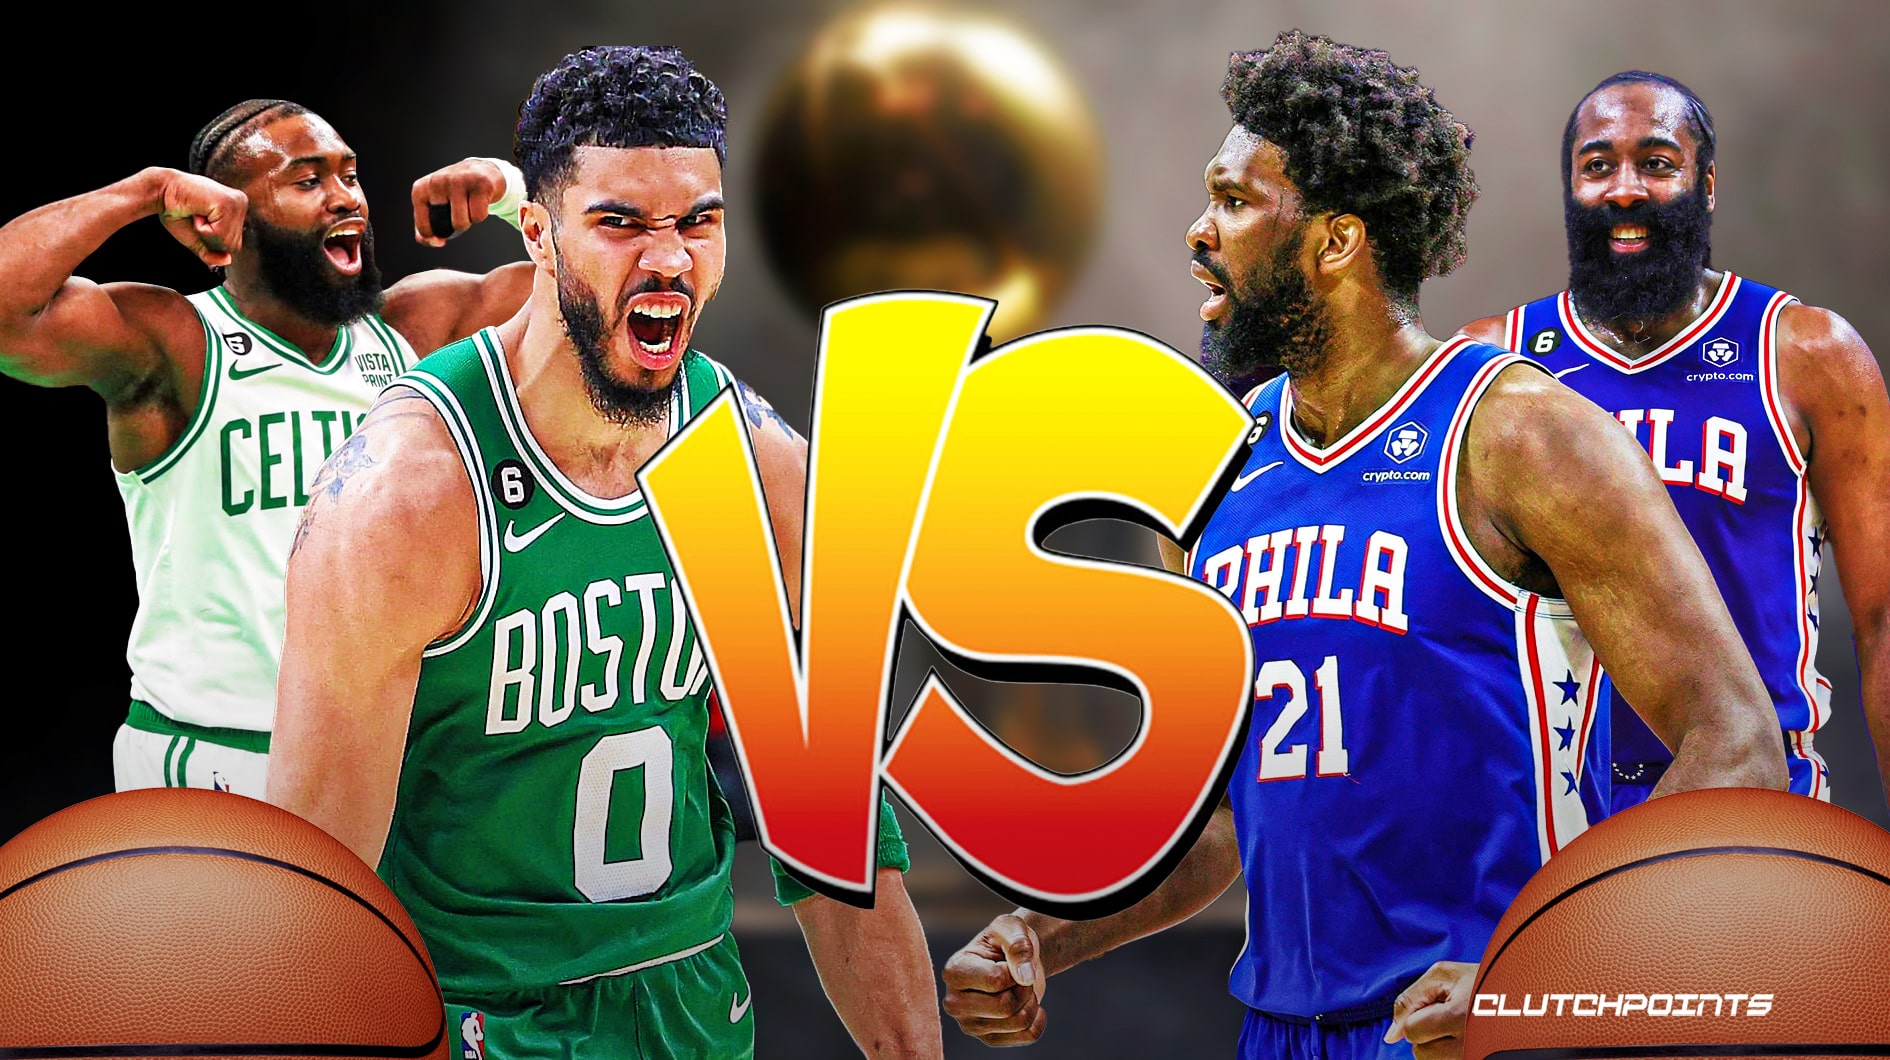 Nba Playoff Odds Celtics 76ers Top Prop Bets For Game 6